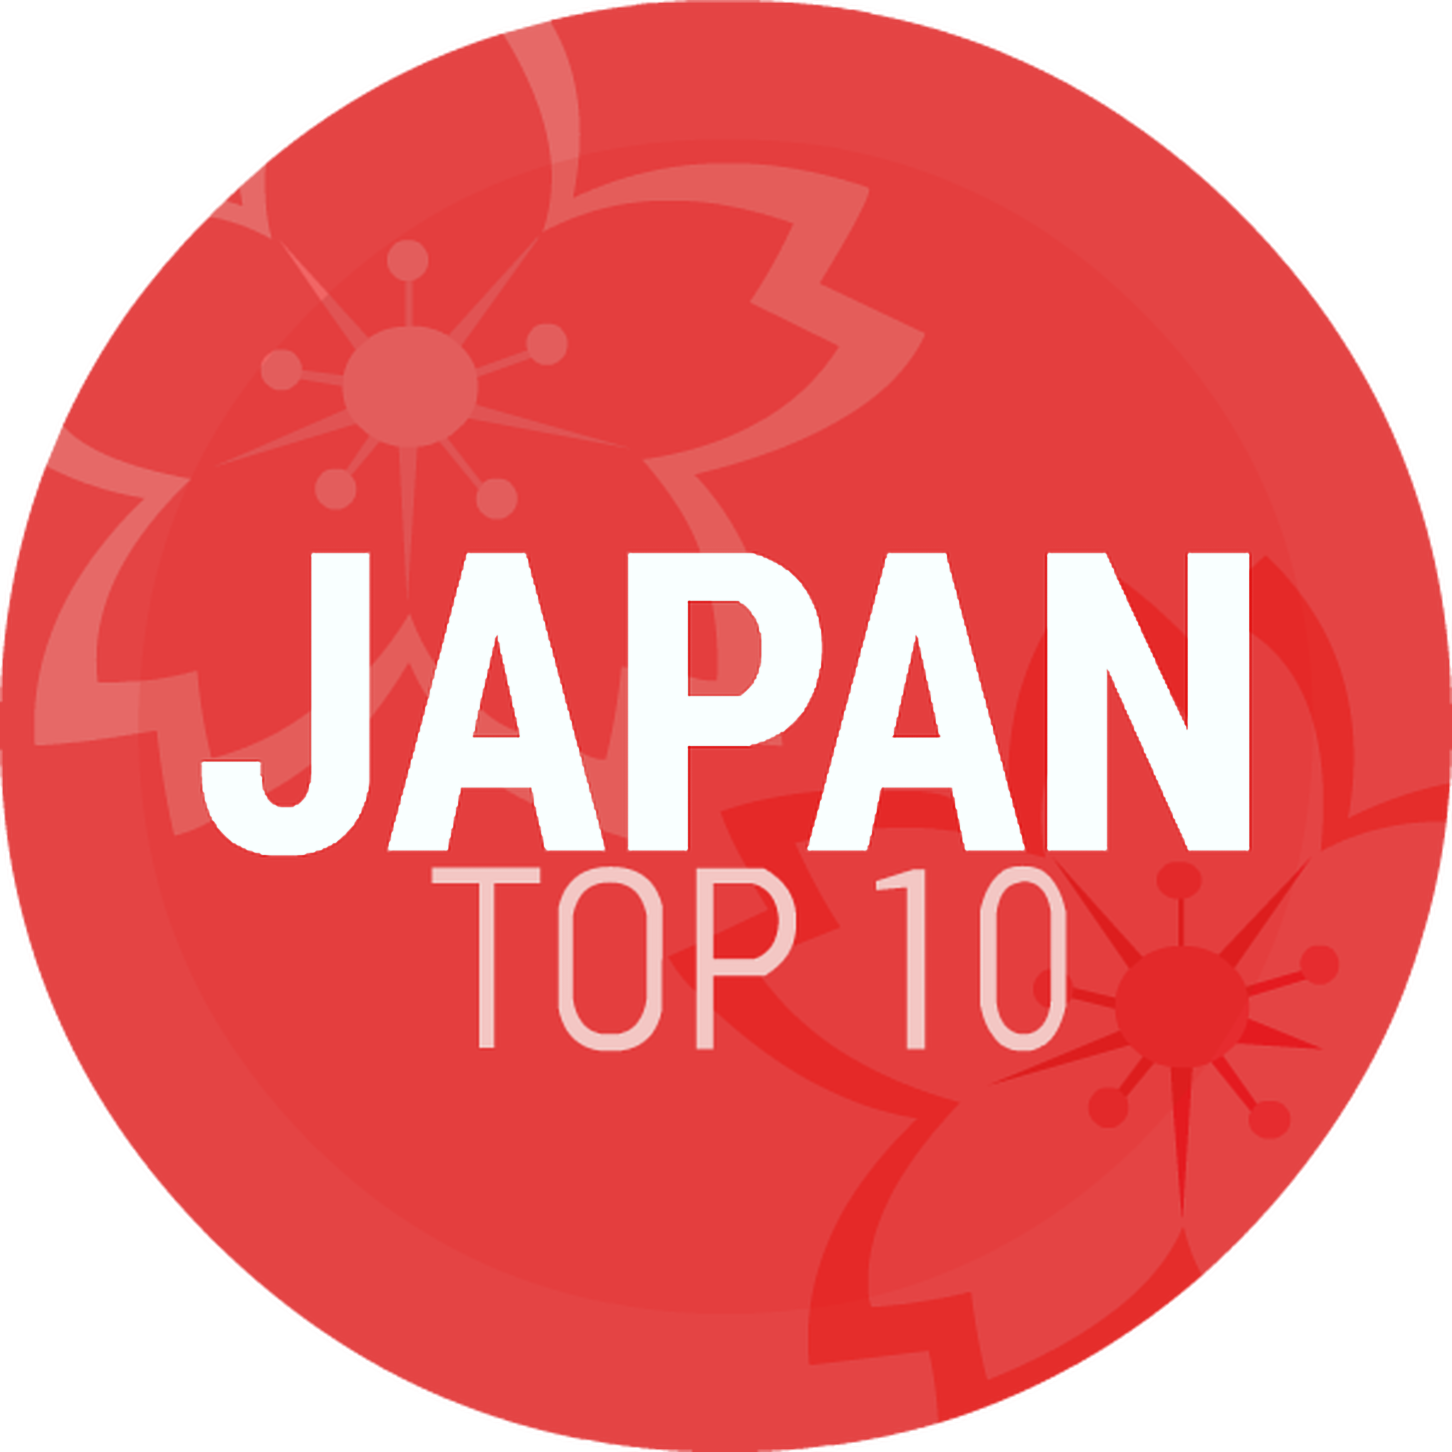 Episode 32: Japan Top 10 Early April 2014 Countdown